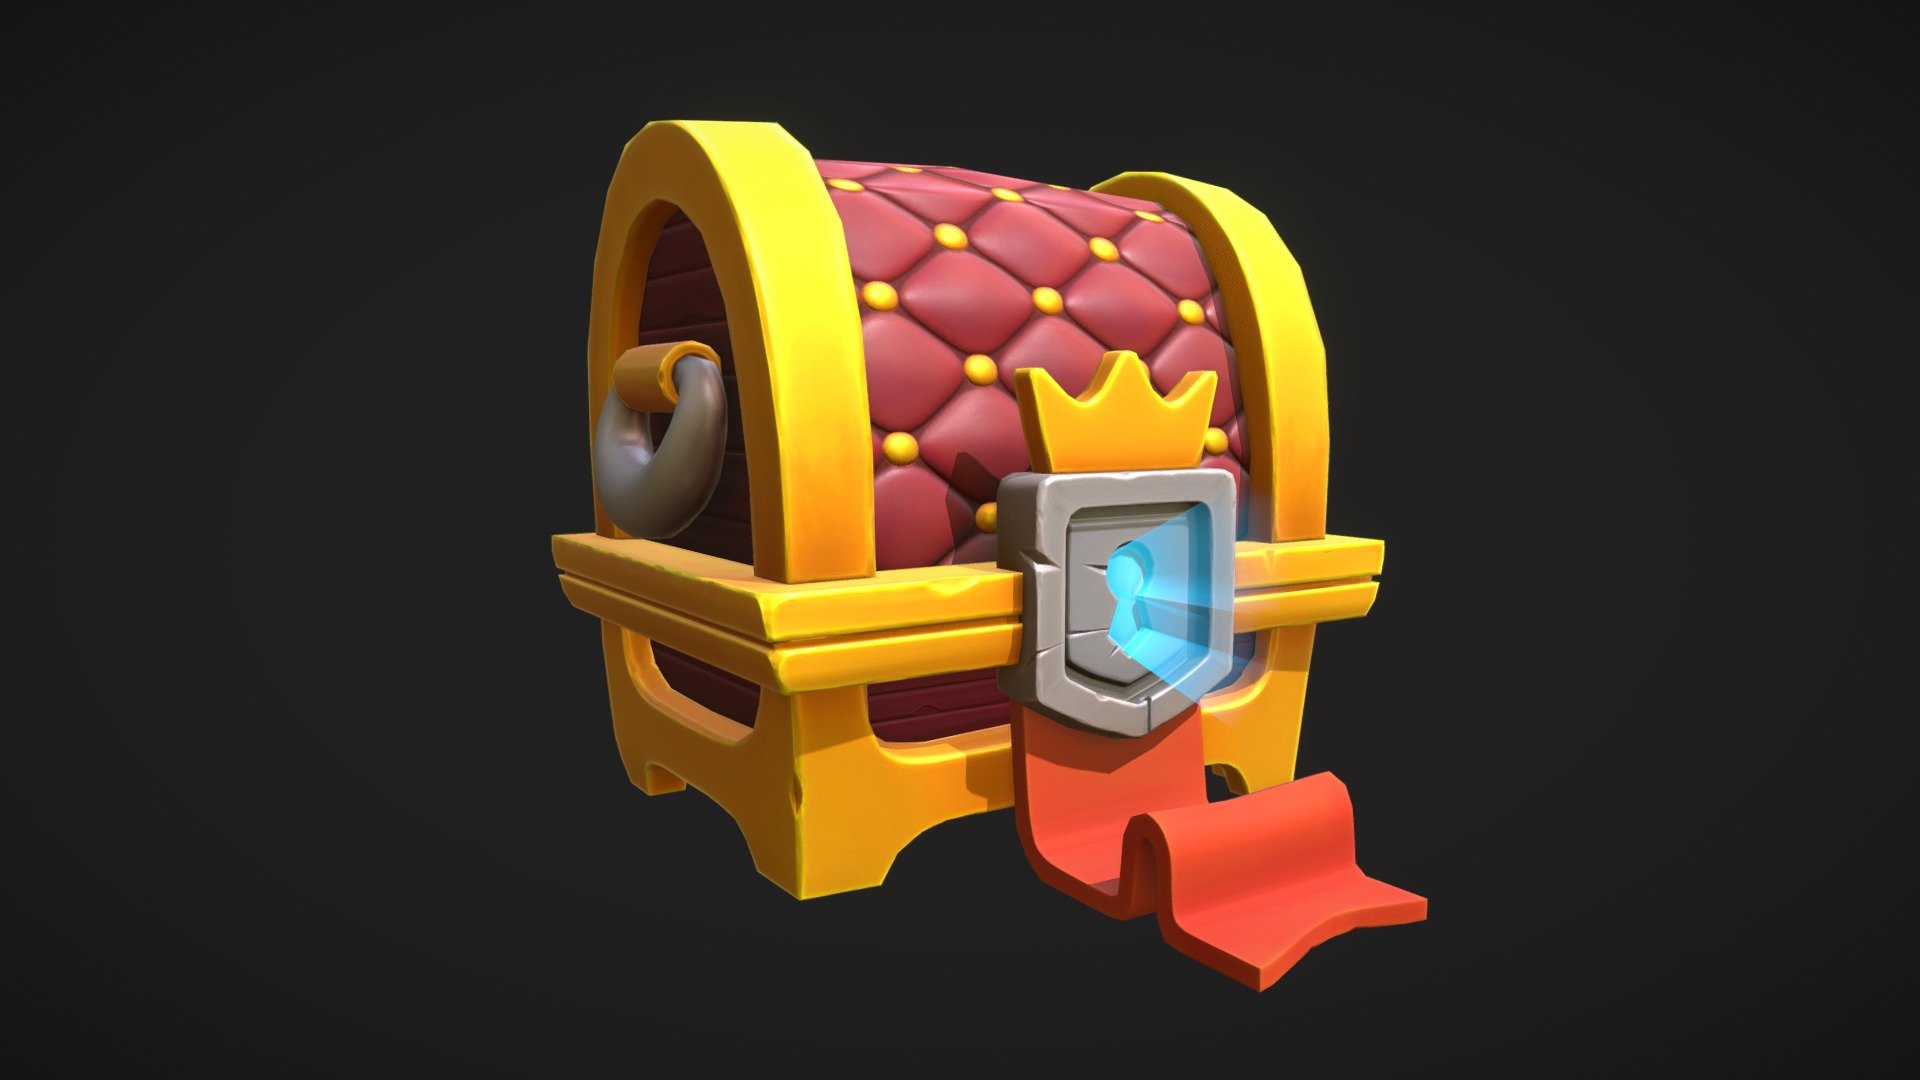 Stylized Golden Chest

The main goal of this project was to follow the 2D concept art and translate the aesthetic to the 3D game-ready low-poly prop.

Feel free to check out my detail breakdowns on https://www.artstation.com/artwork/QrWNG8 
Follow me on Instagram for the future art post: https://www.instagram.com/dycho3d/

The 2D concept art is by Erolin Art, https://www.artstation.com/artwork/J9wBvz, check out Erolin's other amazing arts!

I hope you guys like it! - Stylized Golden Chest - 3D model by Dae Yeon Cho (@dycho3d) 3d model